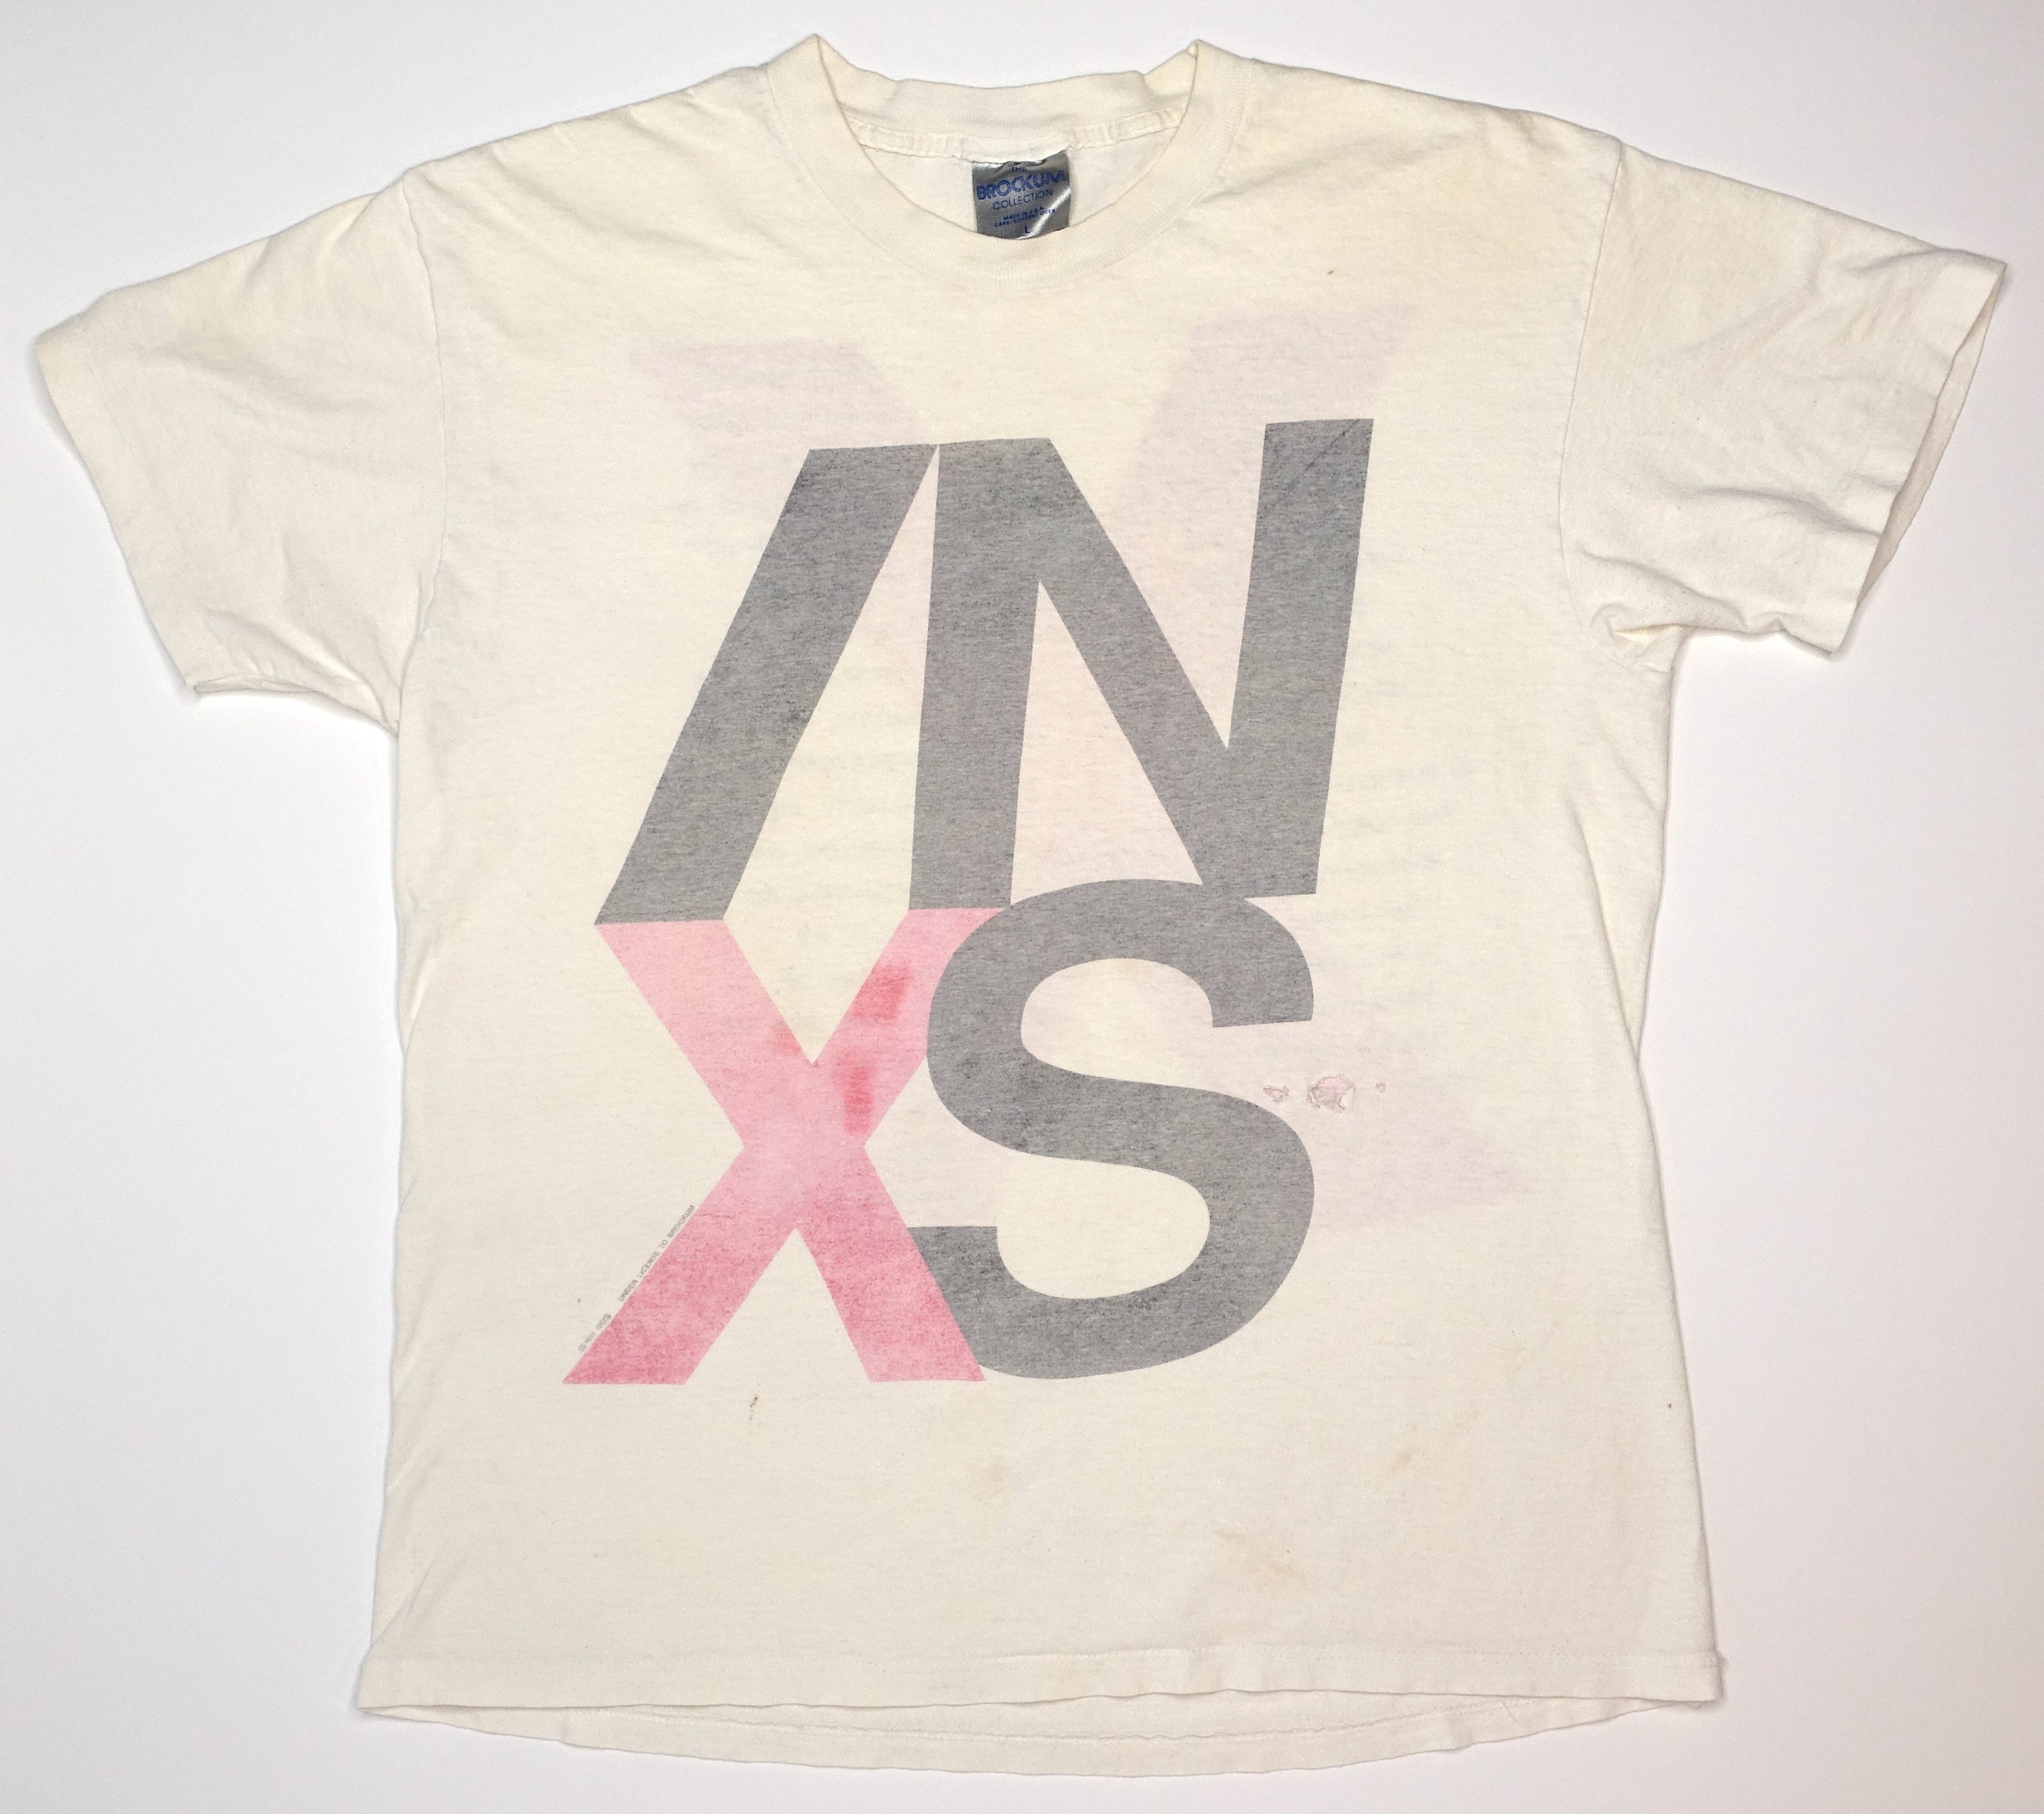 INXS - X North American 1991 Tour Shirt Size Large